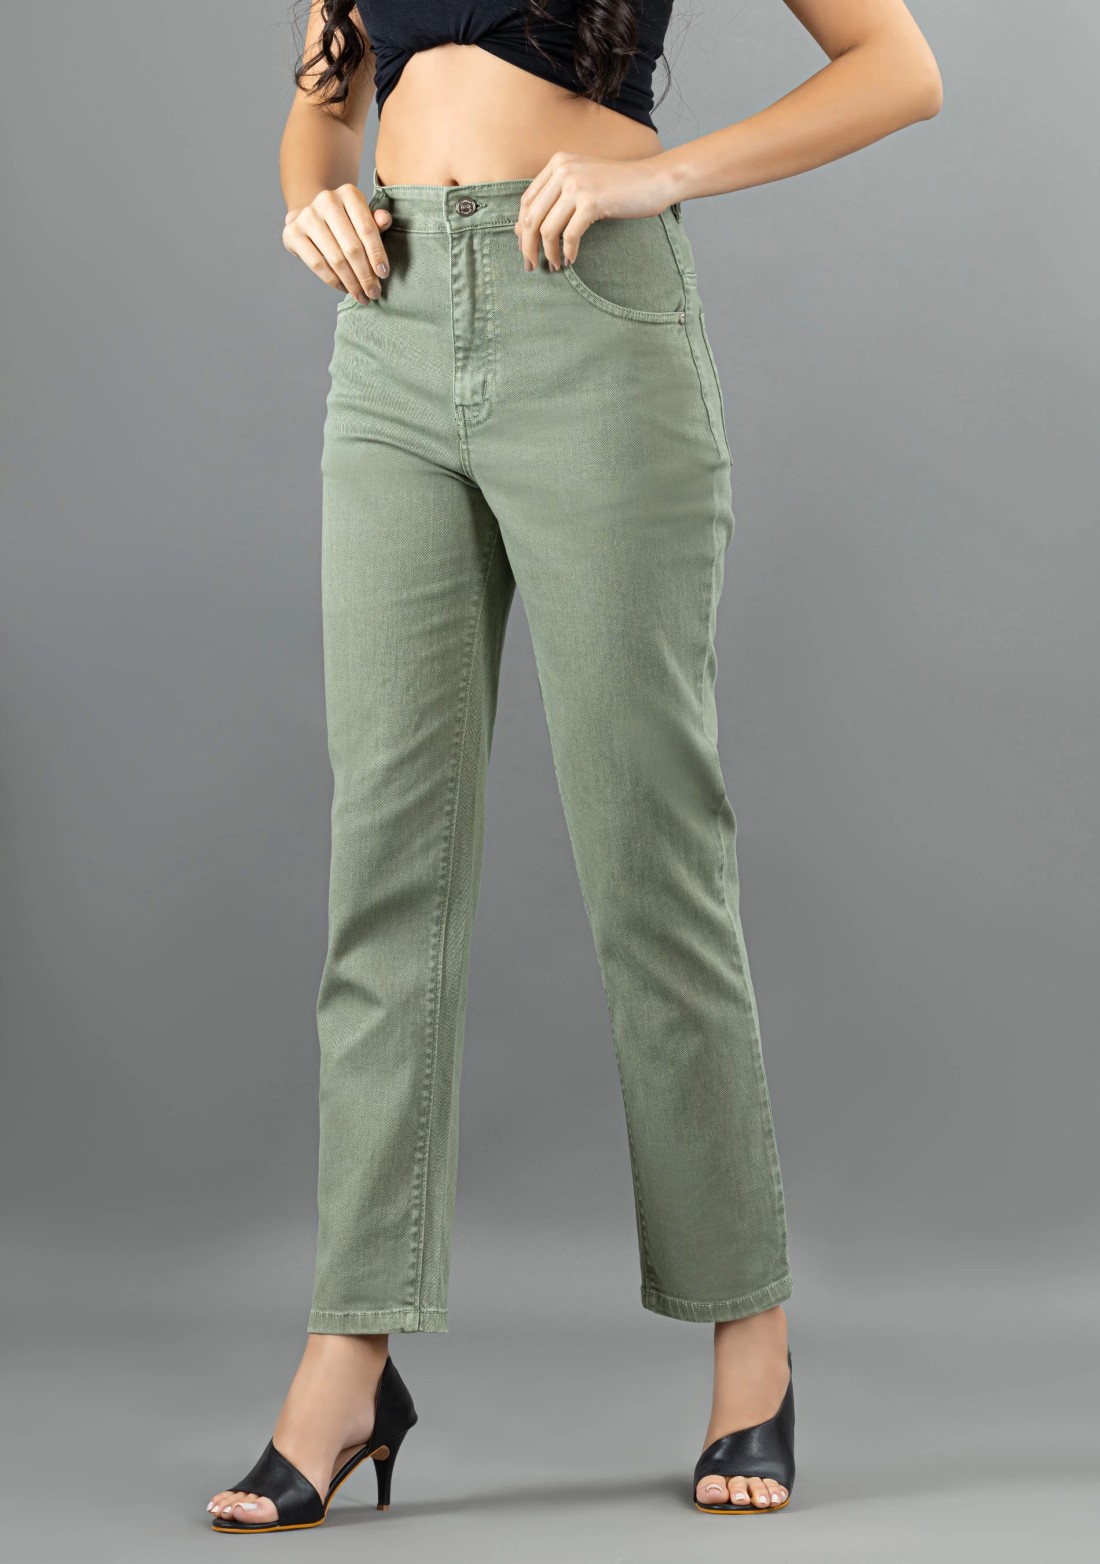 Olive Green Straight Fit Rhysley Women's Jeans